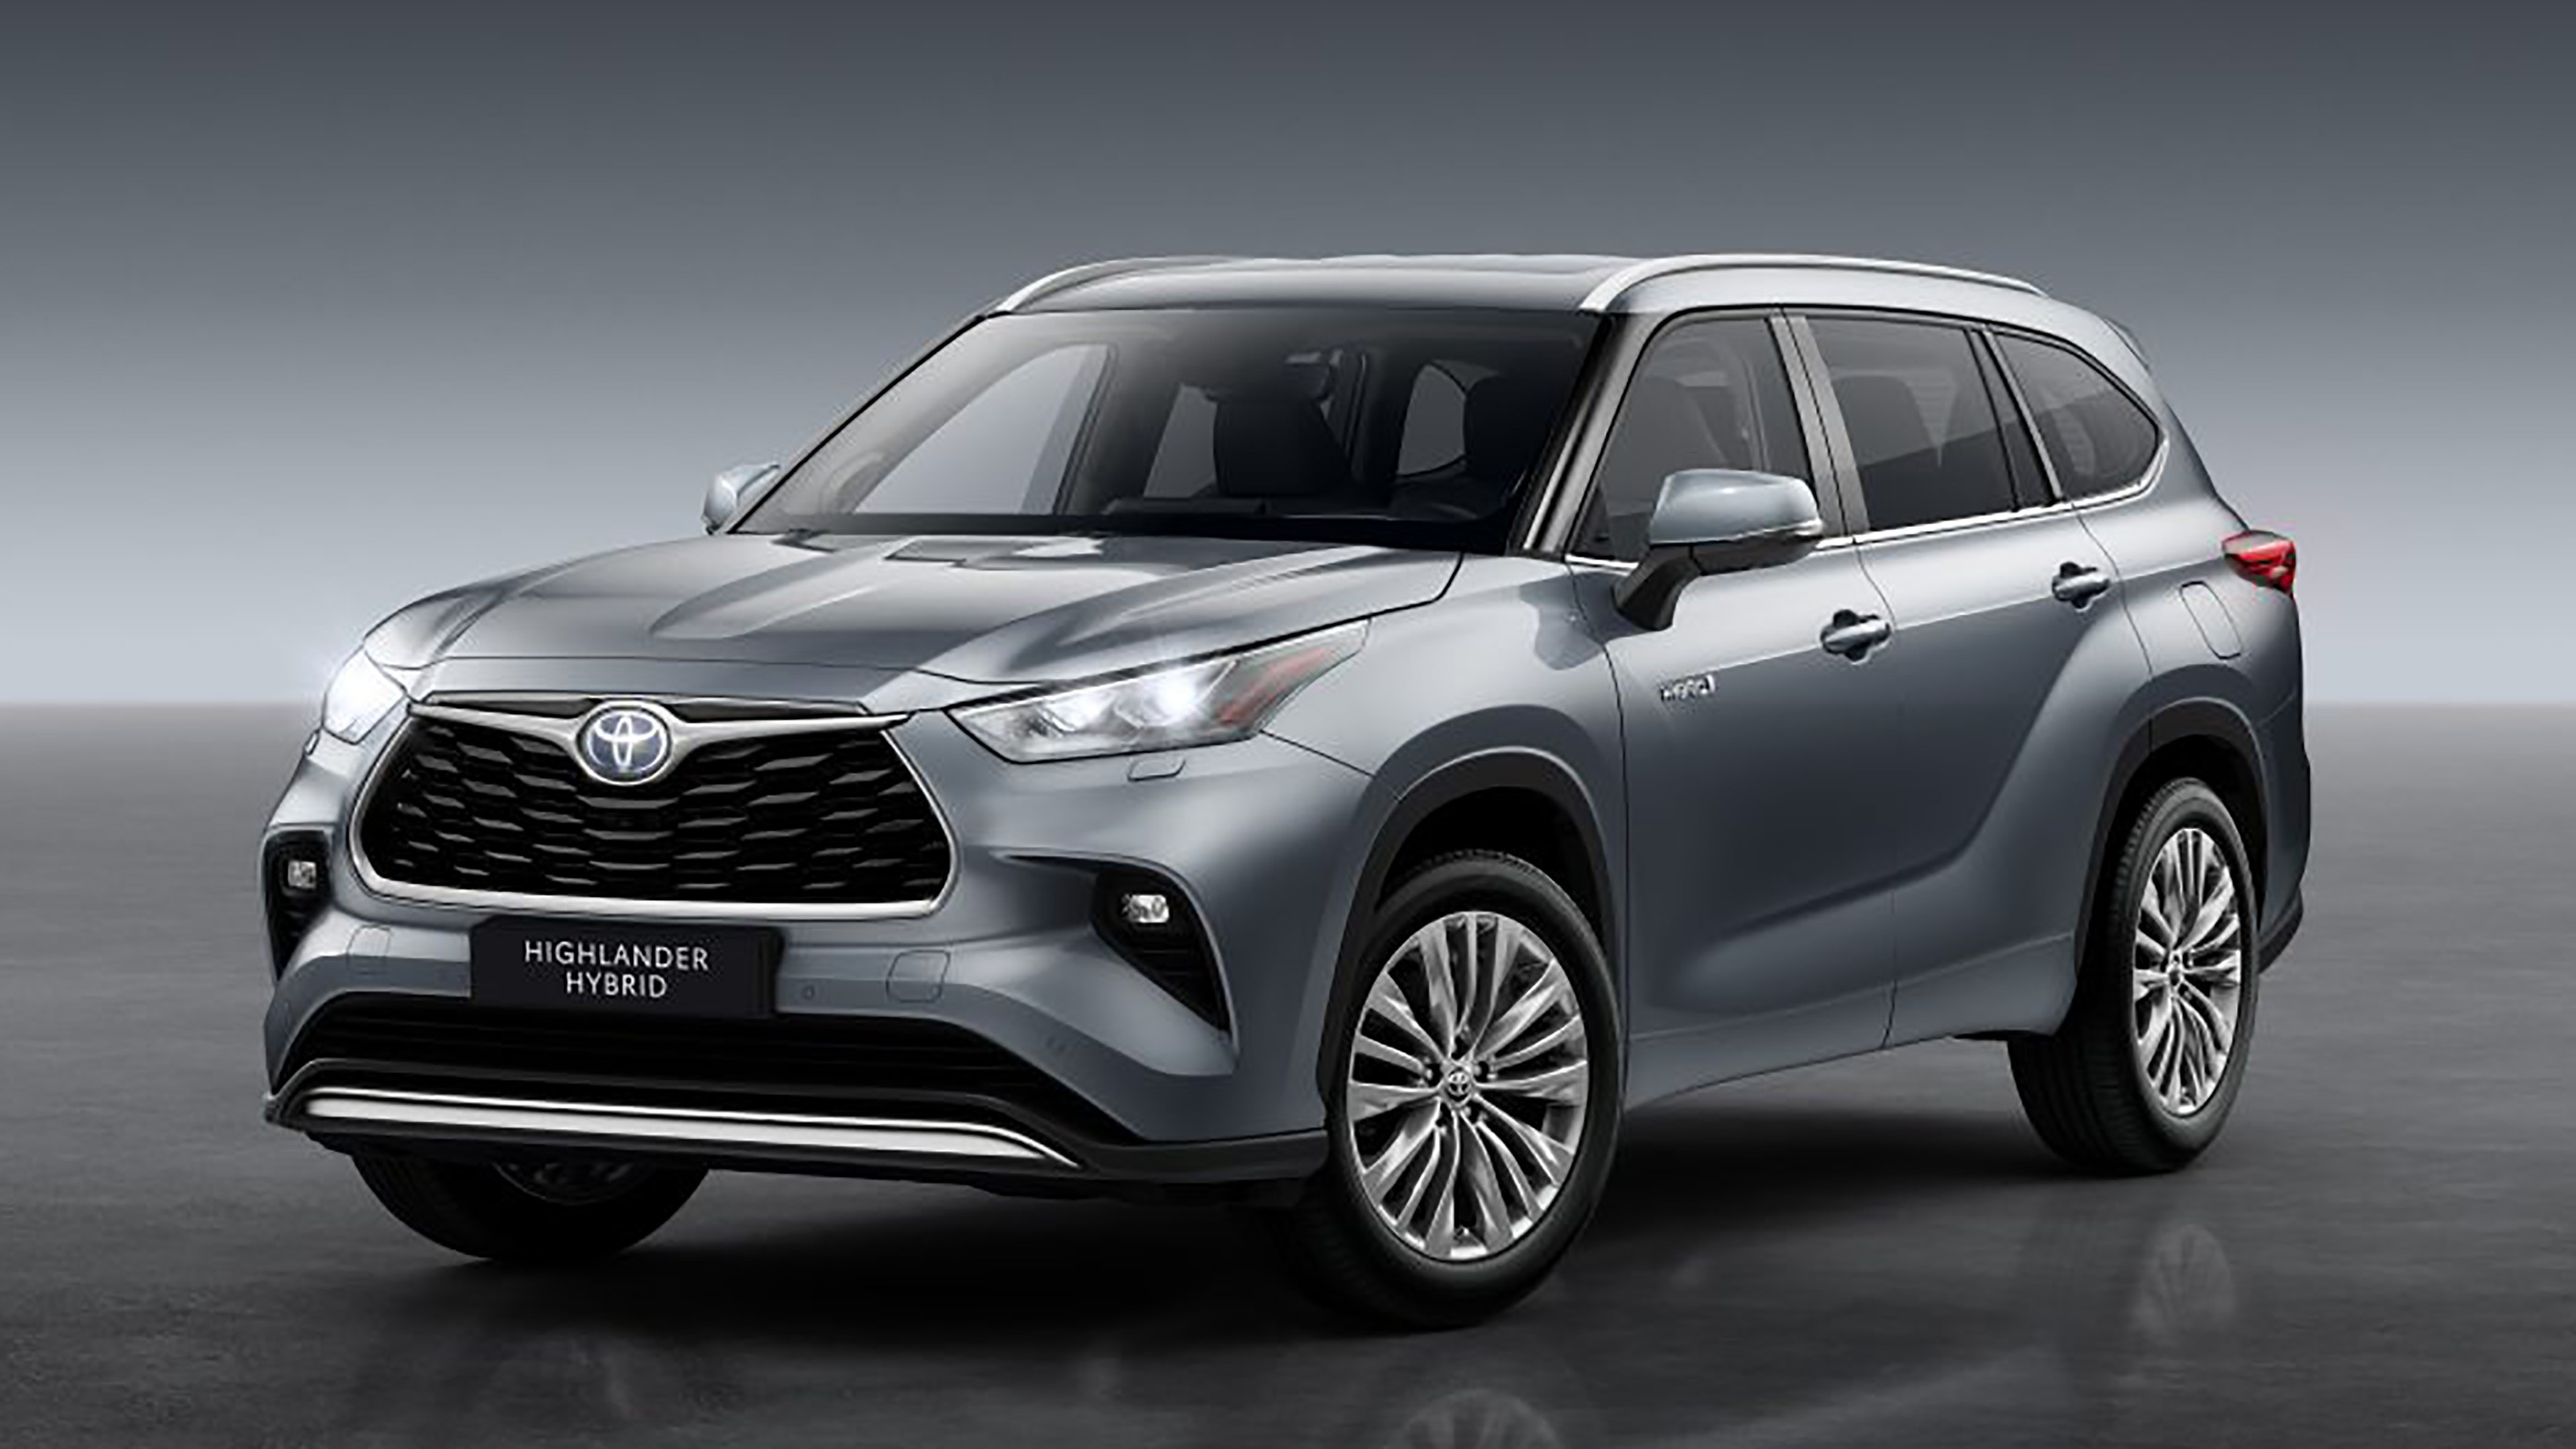 New seven seat Toyota Highlander SUV coming to the UK in 